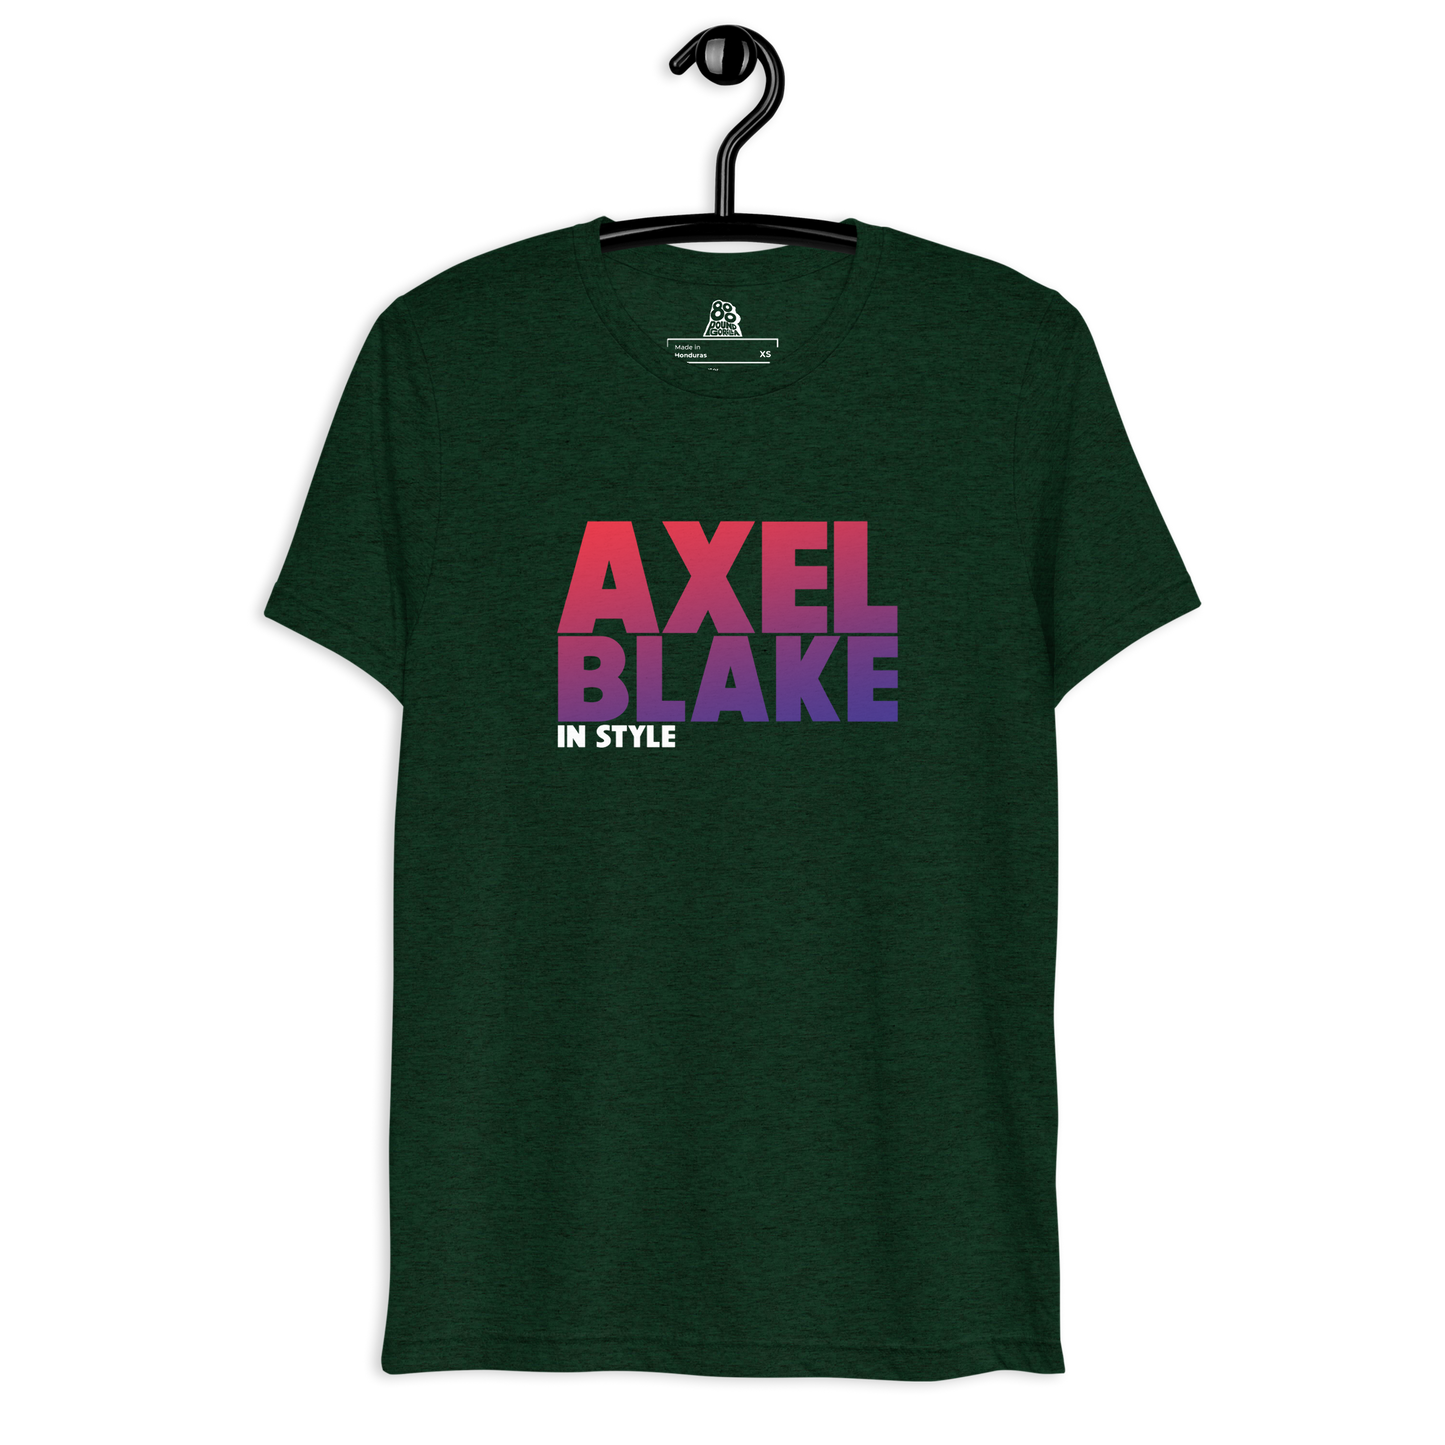 Axel Blake - In Style - Short sleeve t-shirt